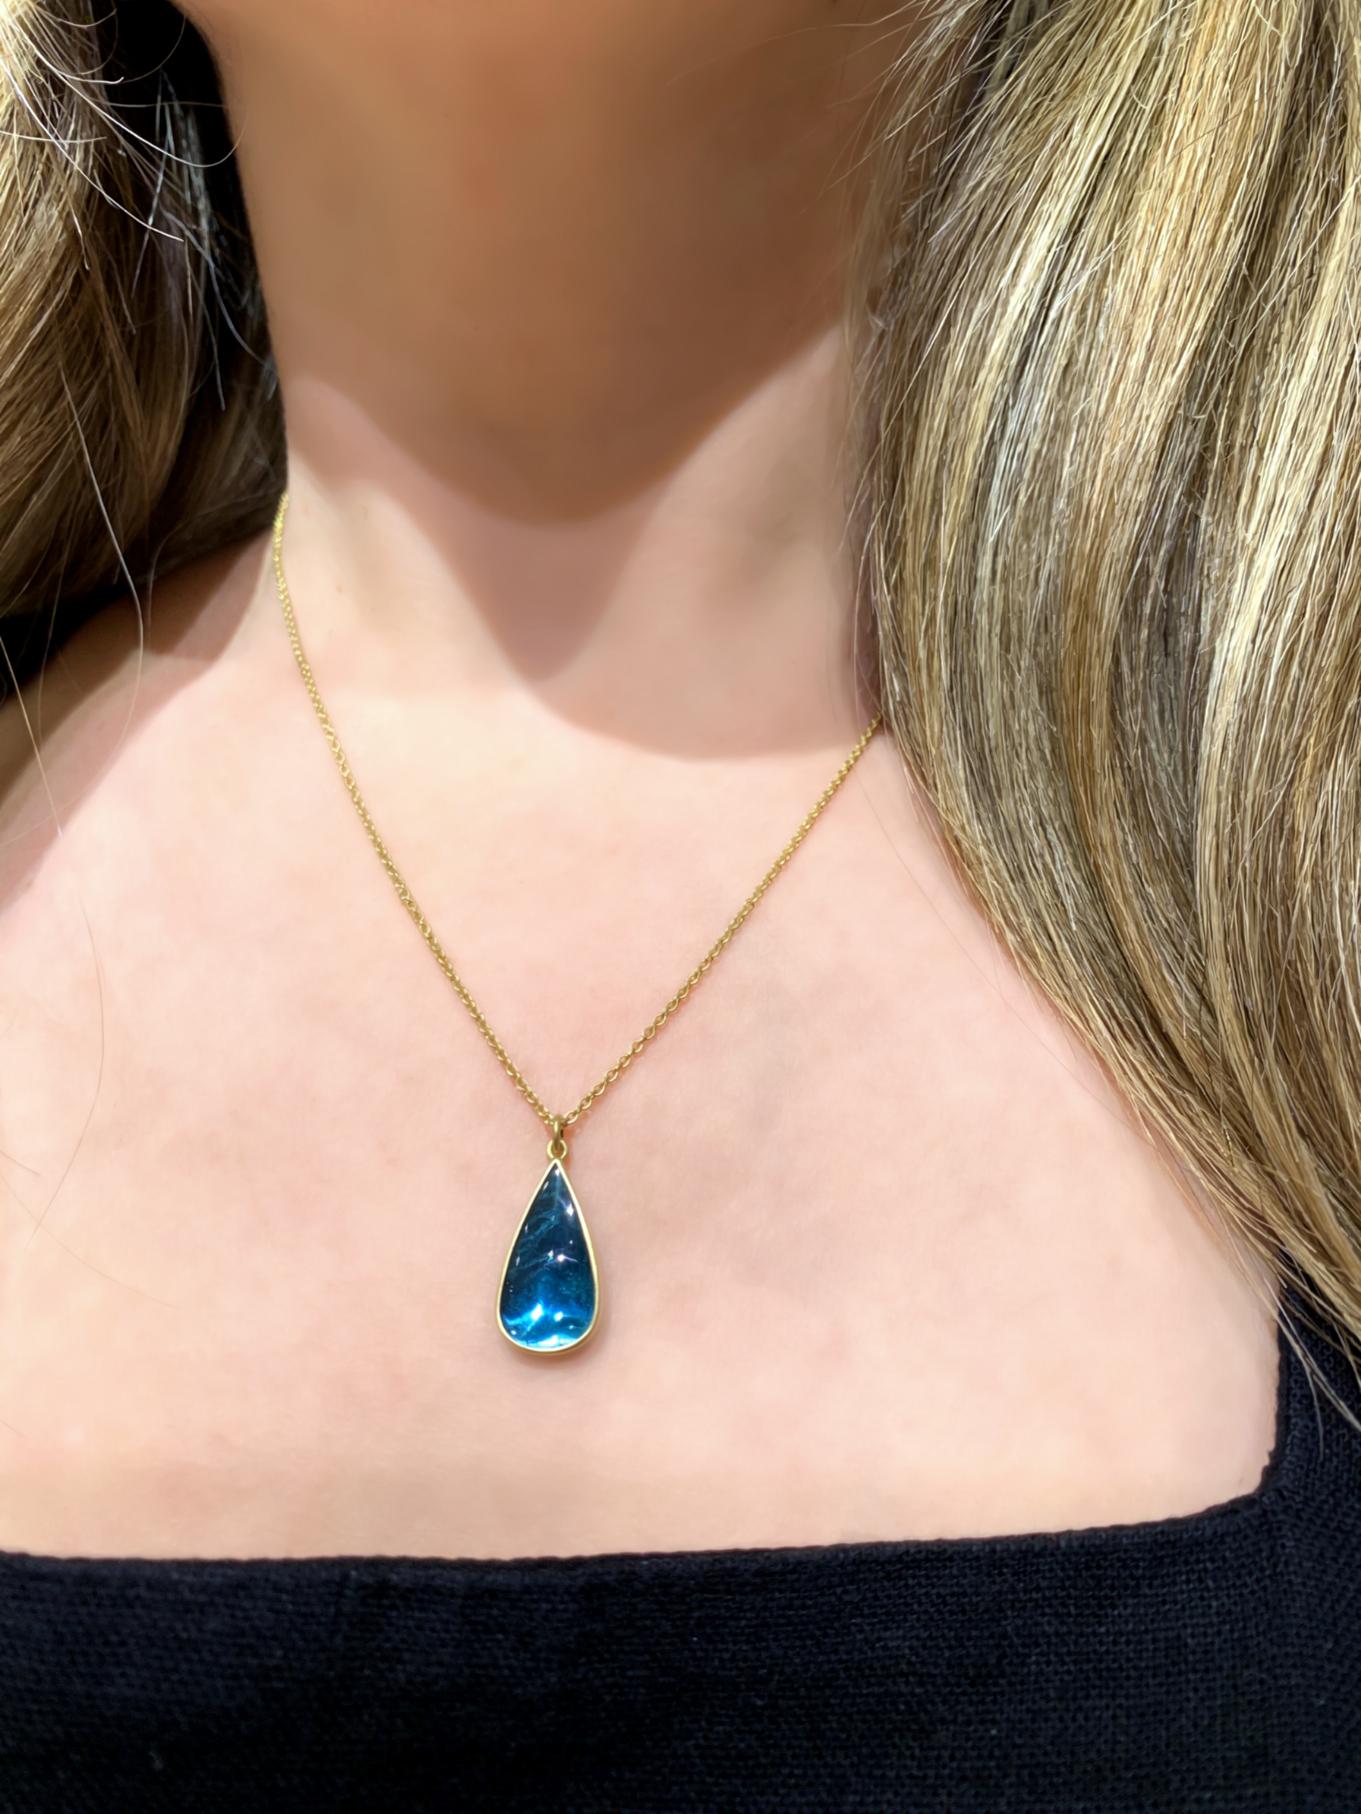 One of a kind necklace hand-fabricated by acclaimed jewelry maker Lola Brooks in the artist's signature-finished 18k yellow gold showcasing a glowing deep blue indicolite tourmaline cabochon pear totaling 3.82 carats on an 18k yellow gold chain. 